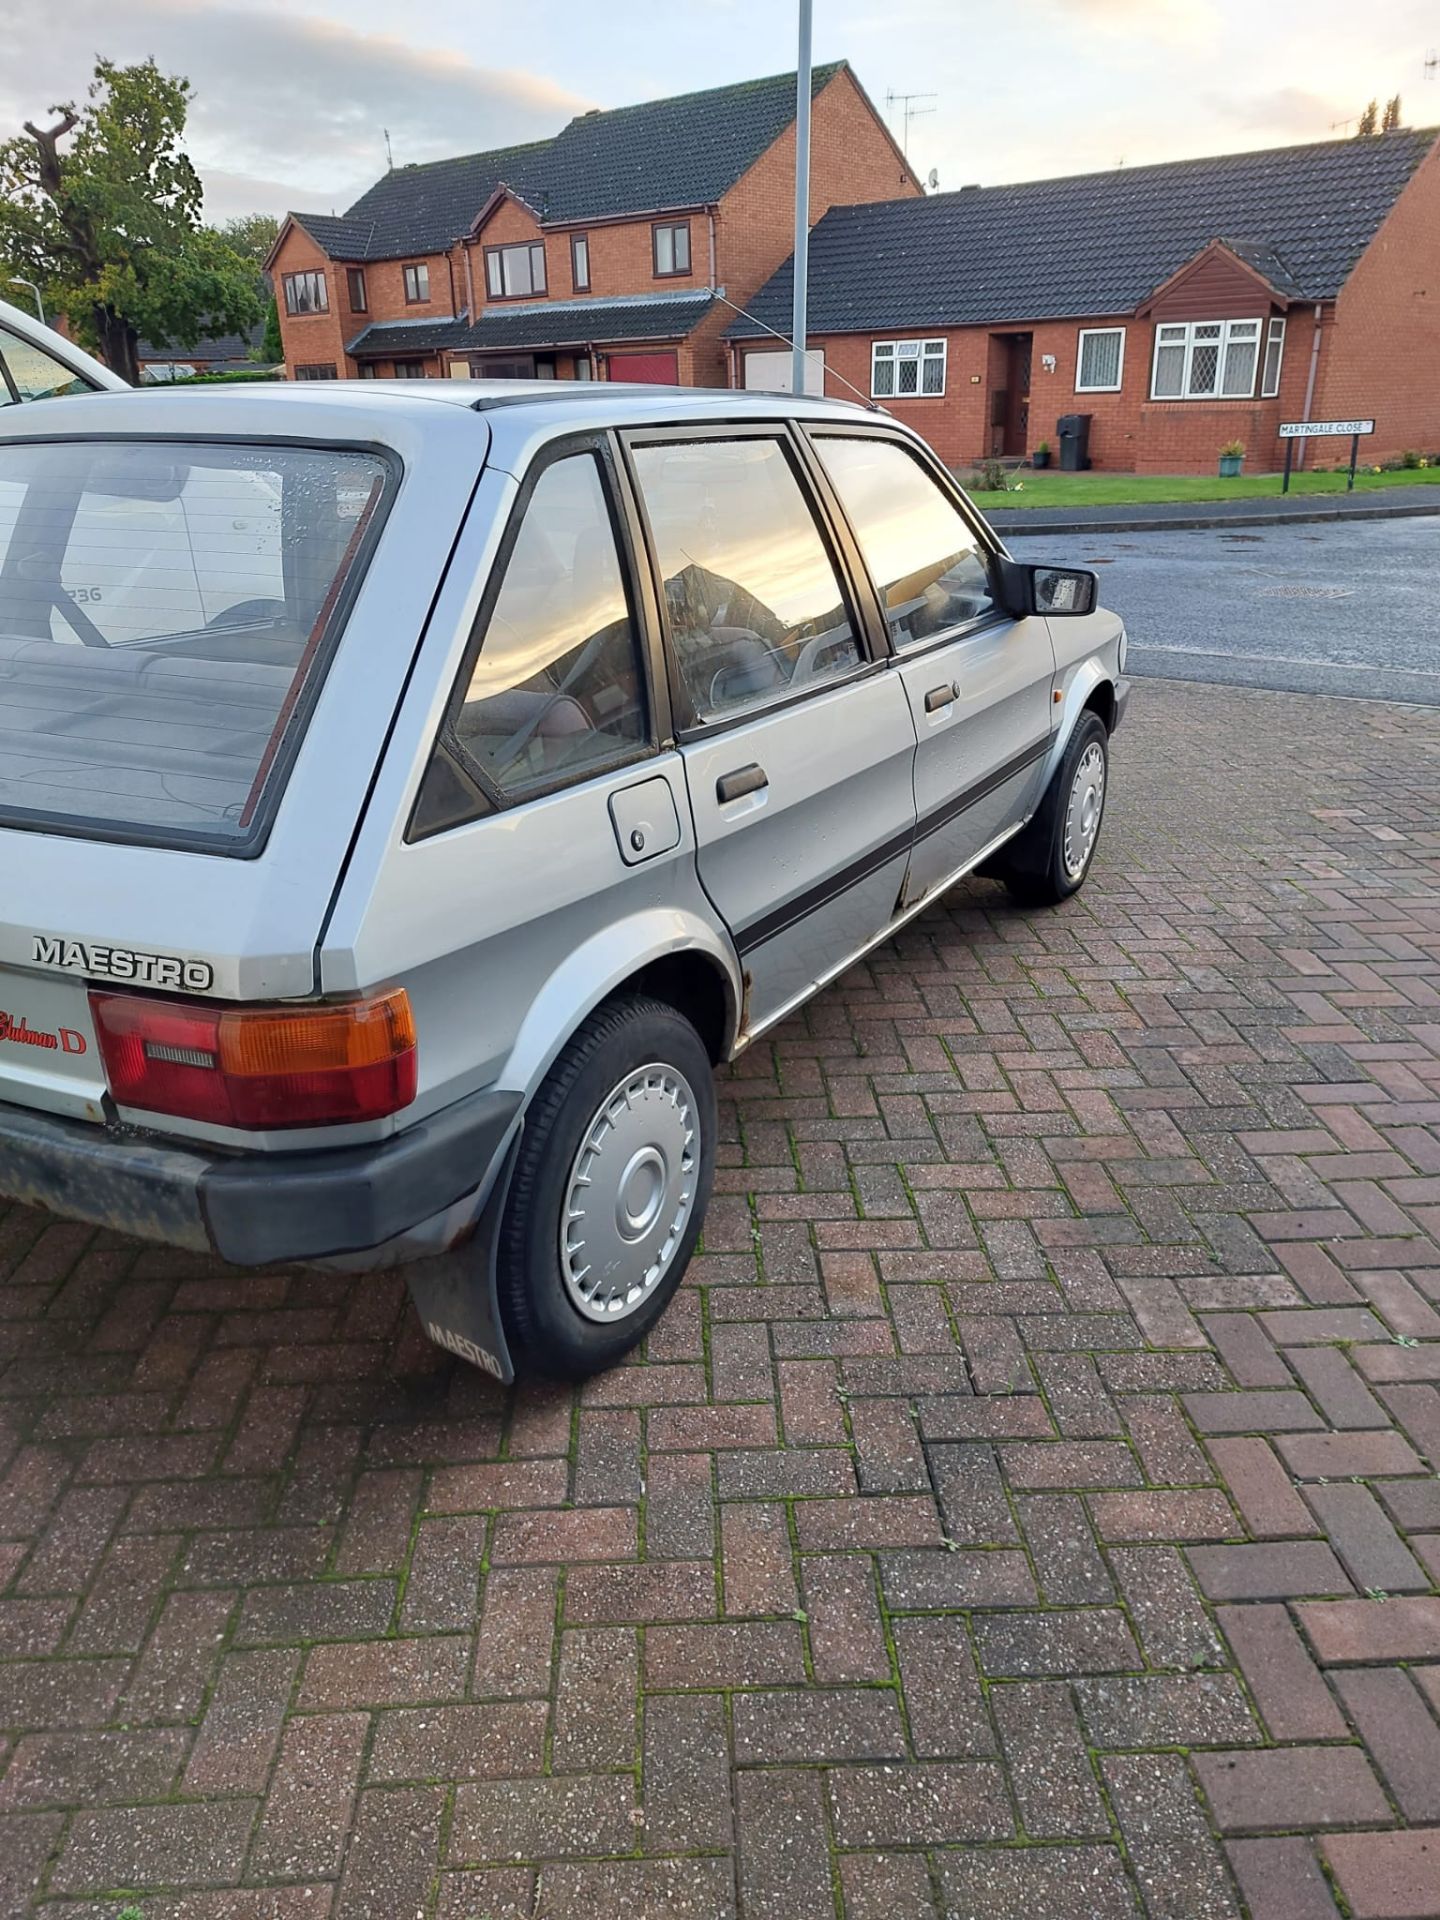 CLASSIC ROVER MAESTRO CLUBMAN D1993 WITH A 2.0L DIESEL TURBO ENGINE - 58K MILES (NO VAT ON HAMMER) - Image 9 of 12